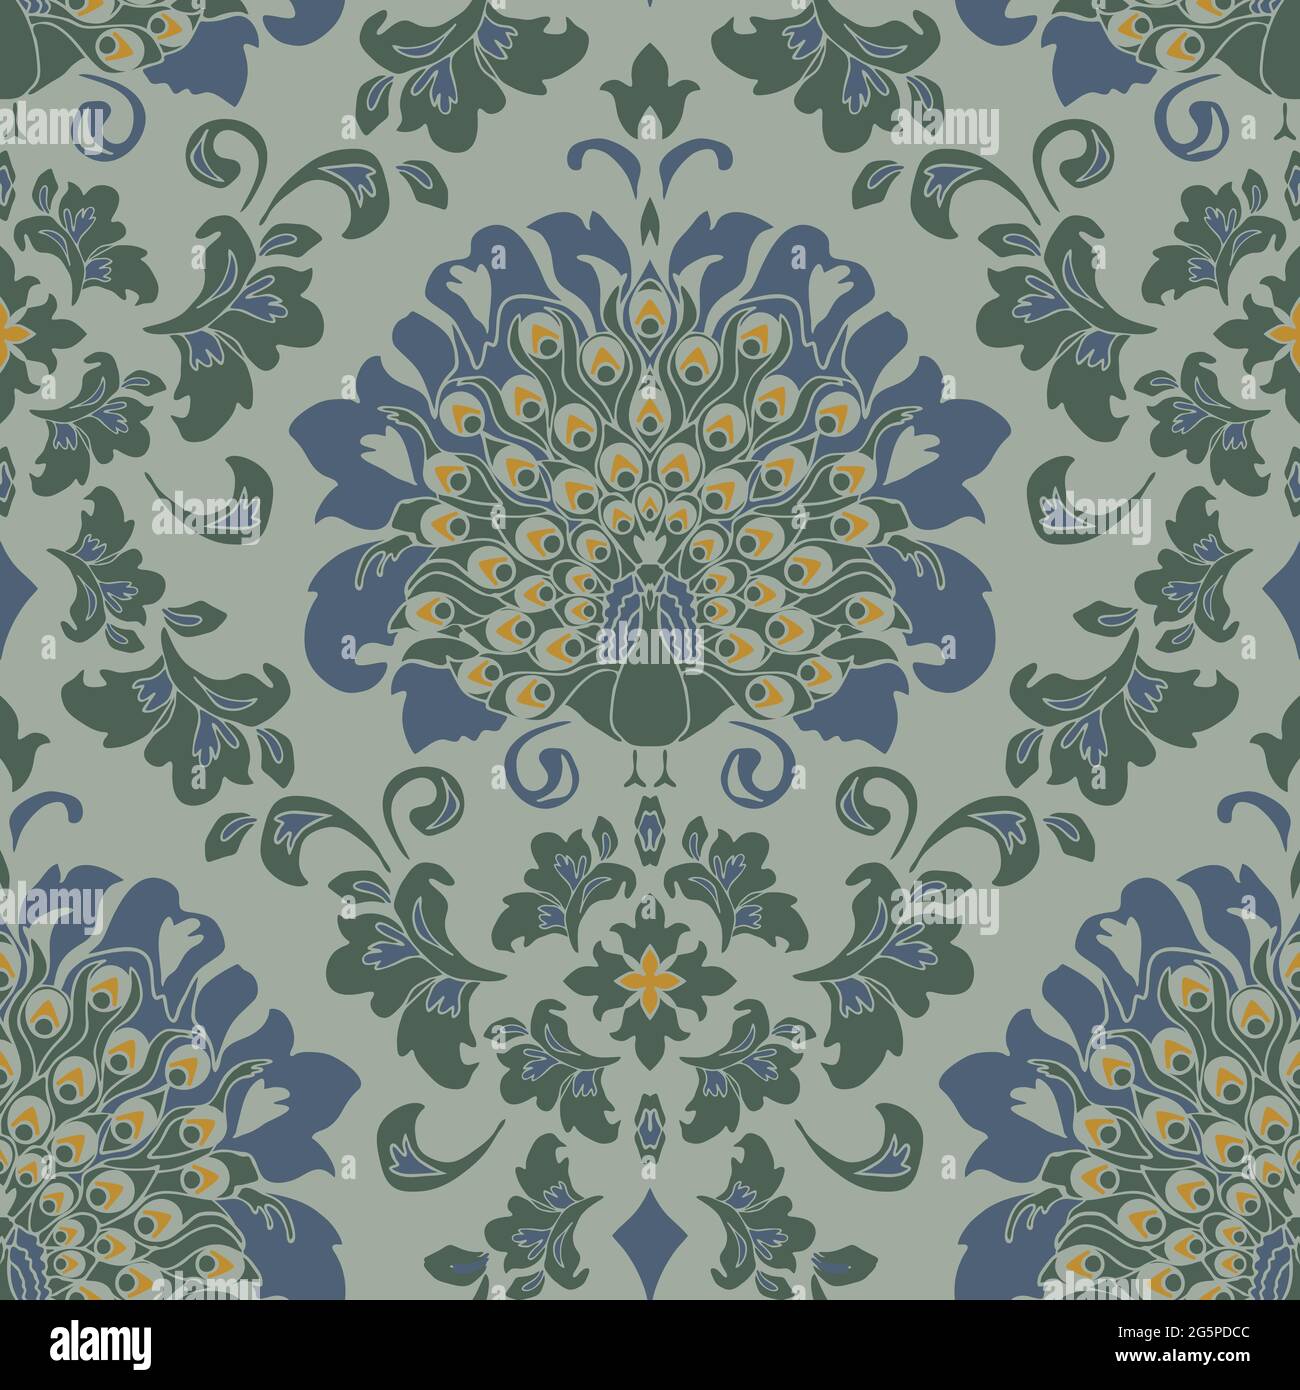 Seamless vector pattern with romantic bird on blue background. Luxury damask wallpaper with peacock. Vintage royal fashion textile. Stock Vector